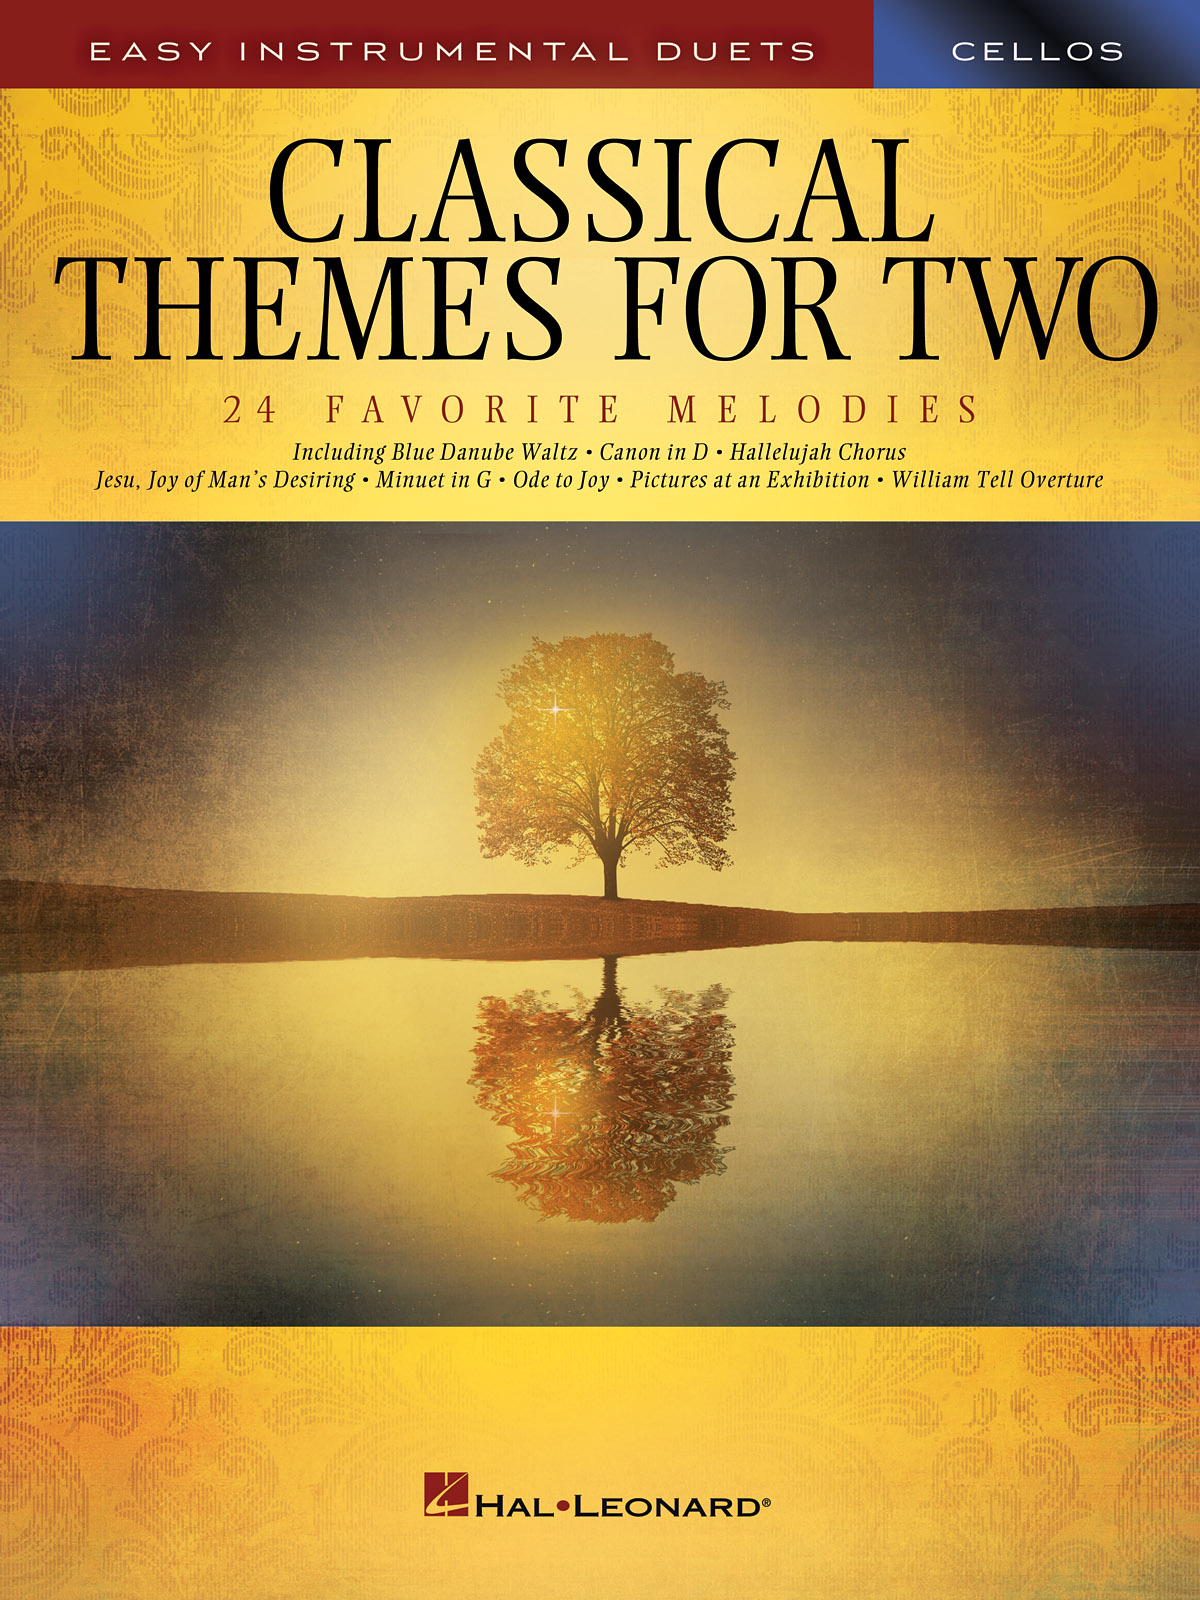 Classical Themes for Two pro violoncello - Easy Instrumental Duets